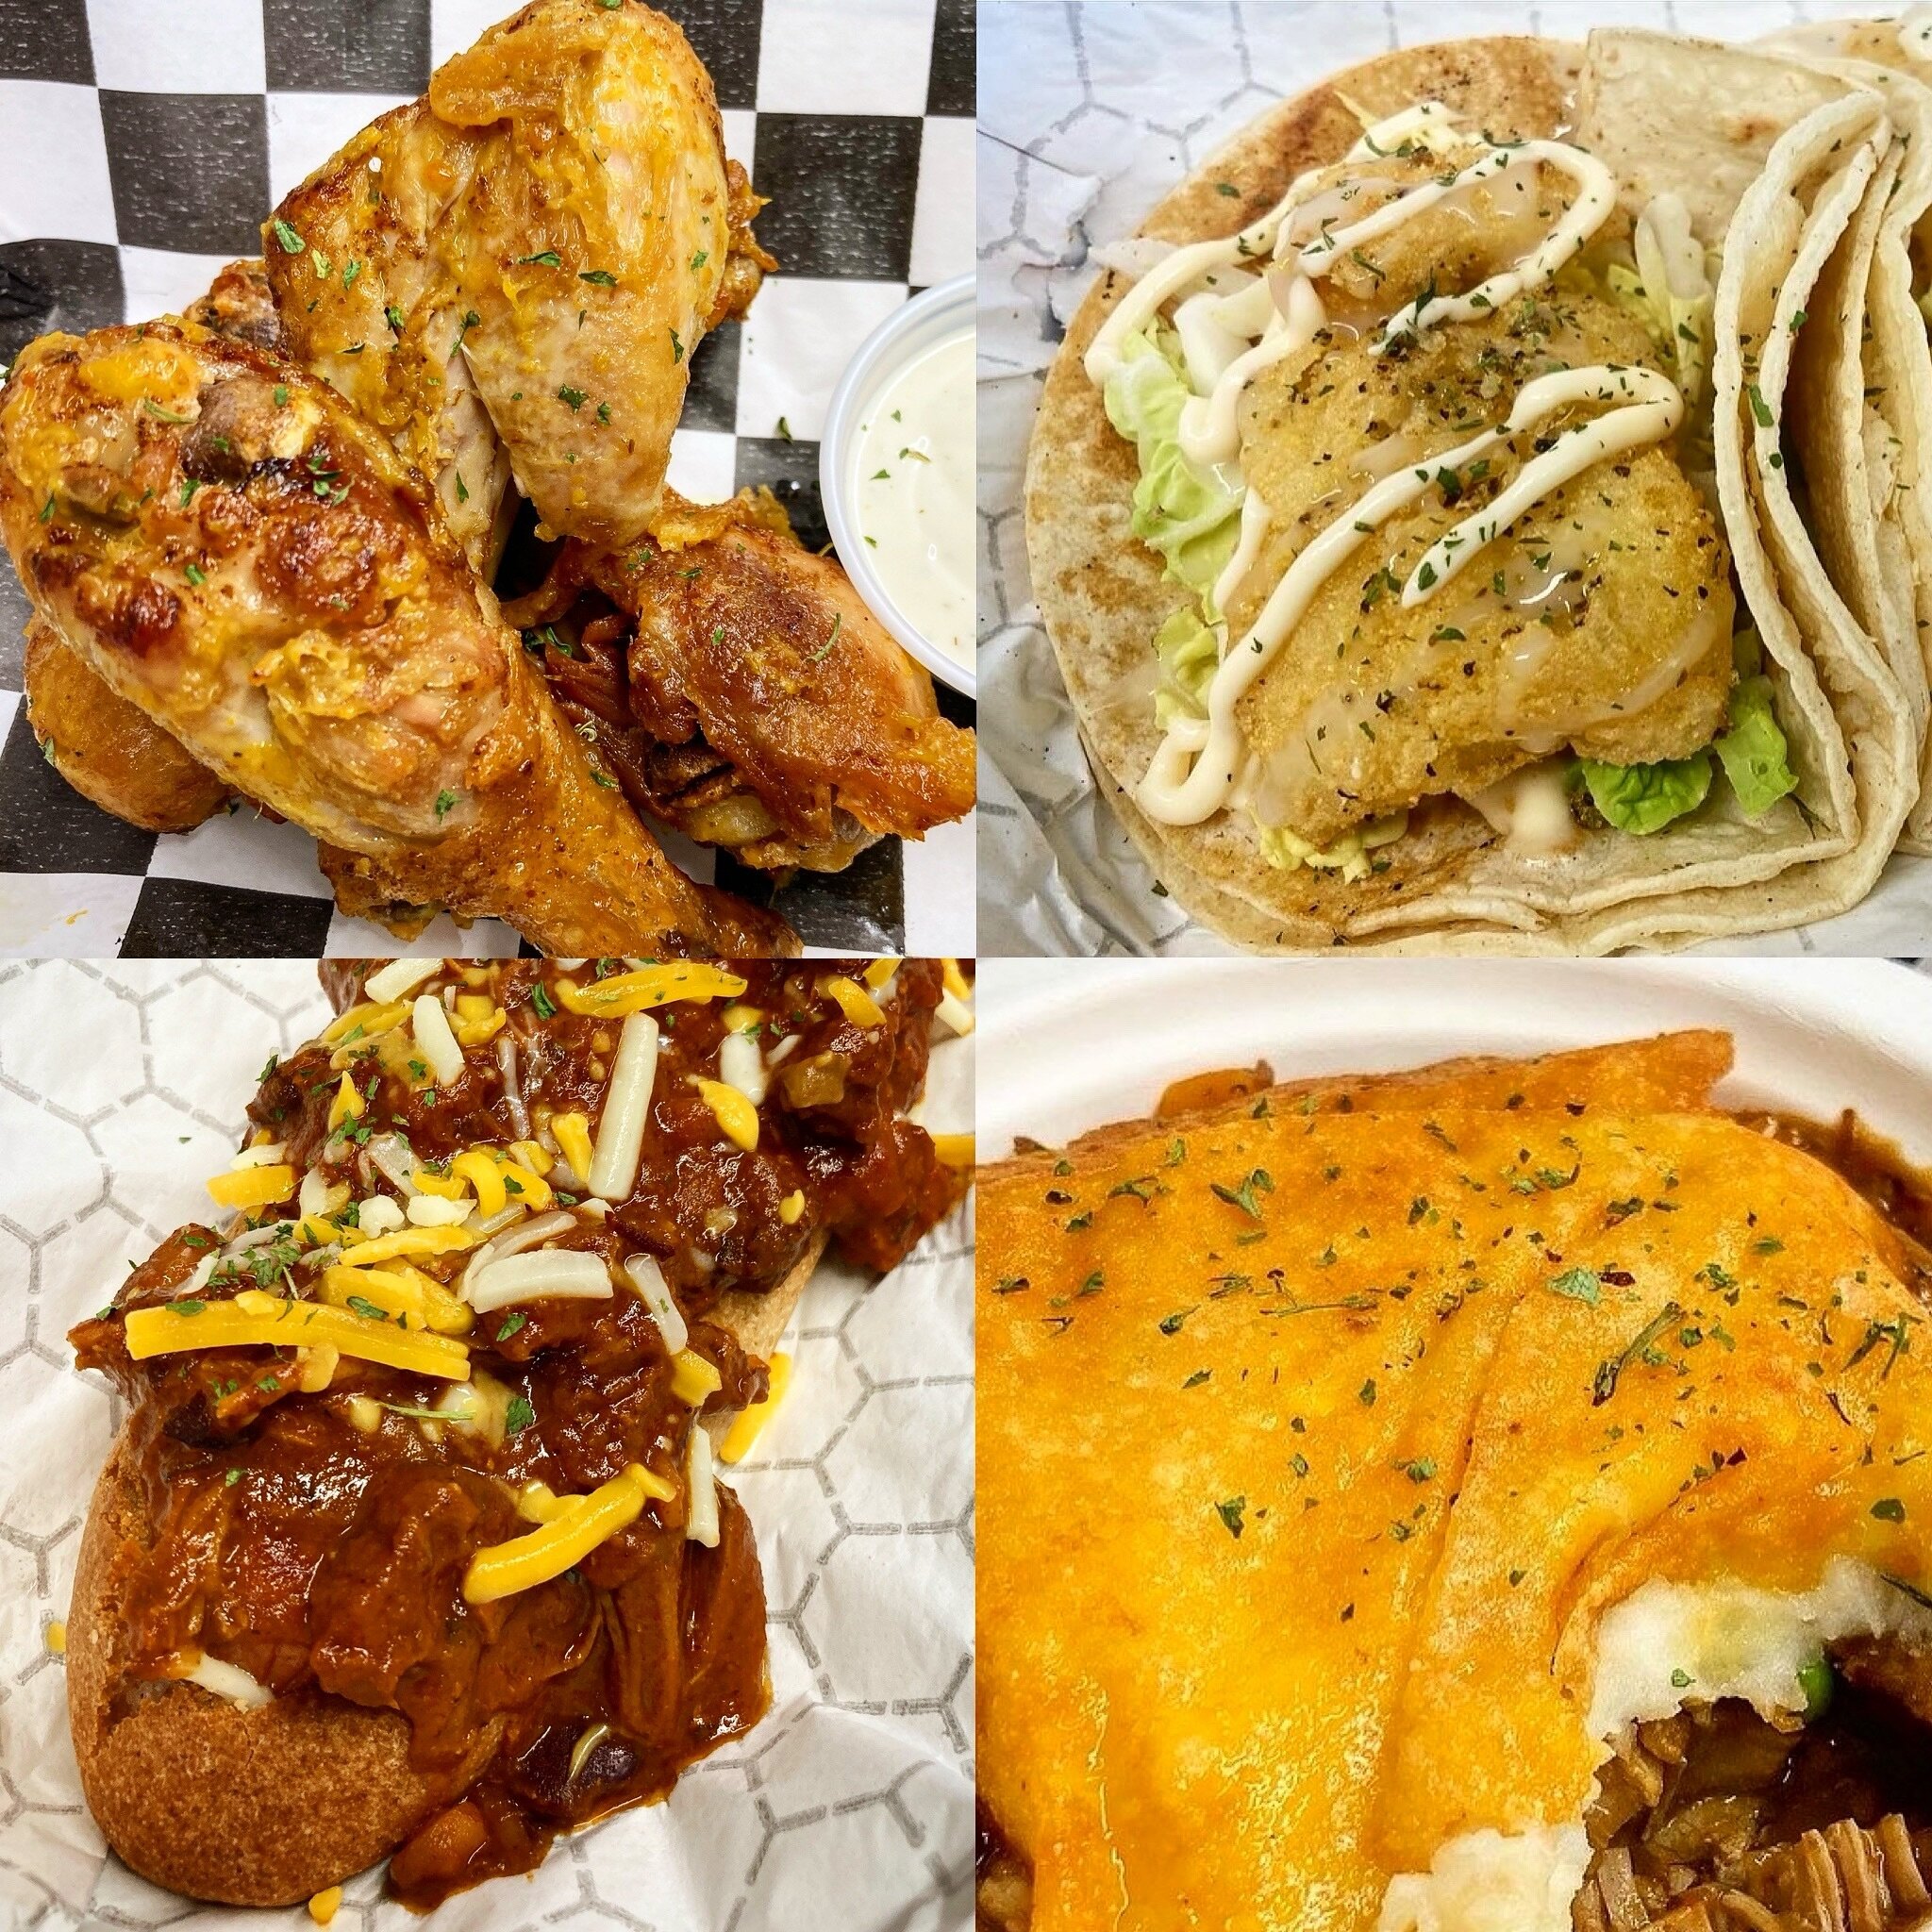 With this cold and wet weather this weekend, we figured it was the perfect time to bring back our Take Out Meal Deal!

Appetizer: Dino Wings (confit chicken drumsticks) or Fish Tacos
Main: Chili Dog or Eugene Style Chili (vegetarian available)
Desser